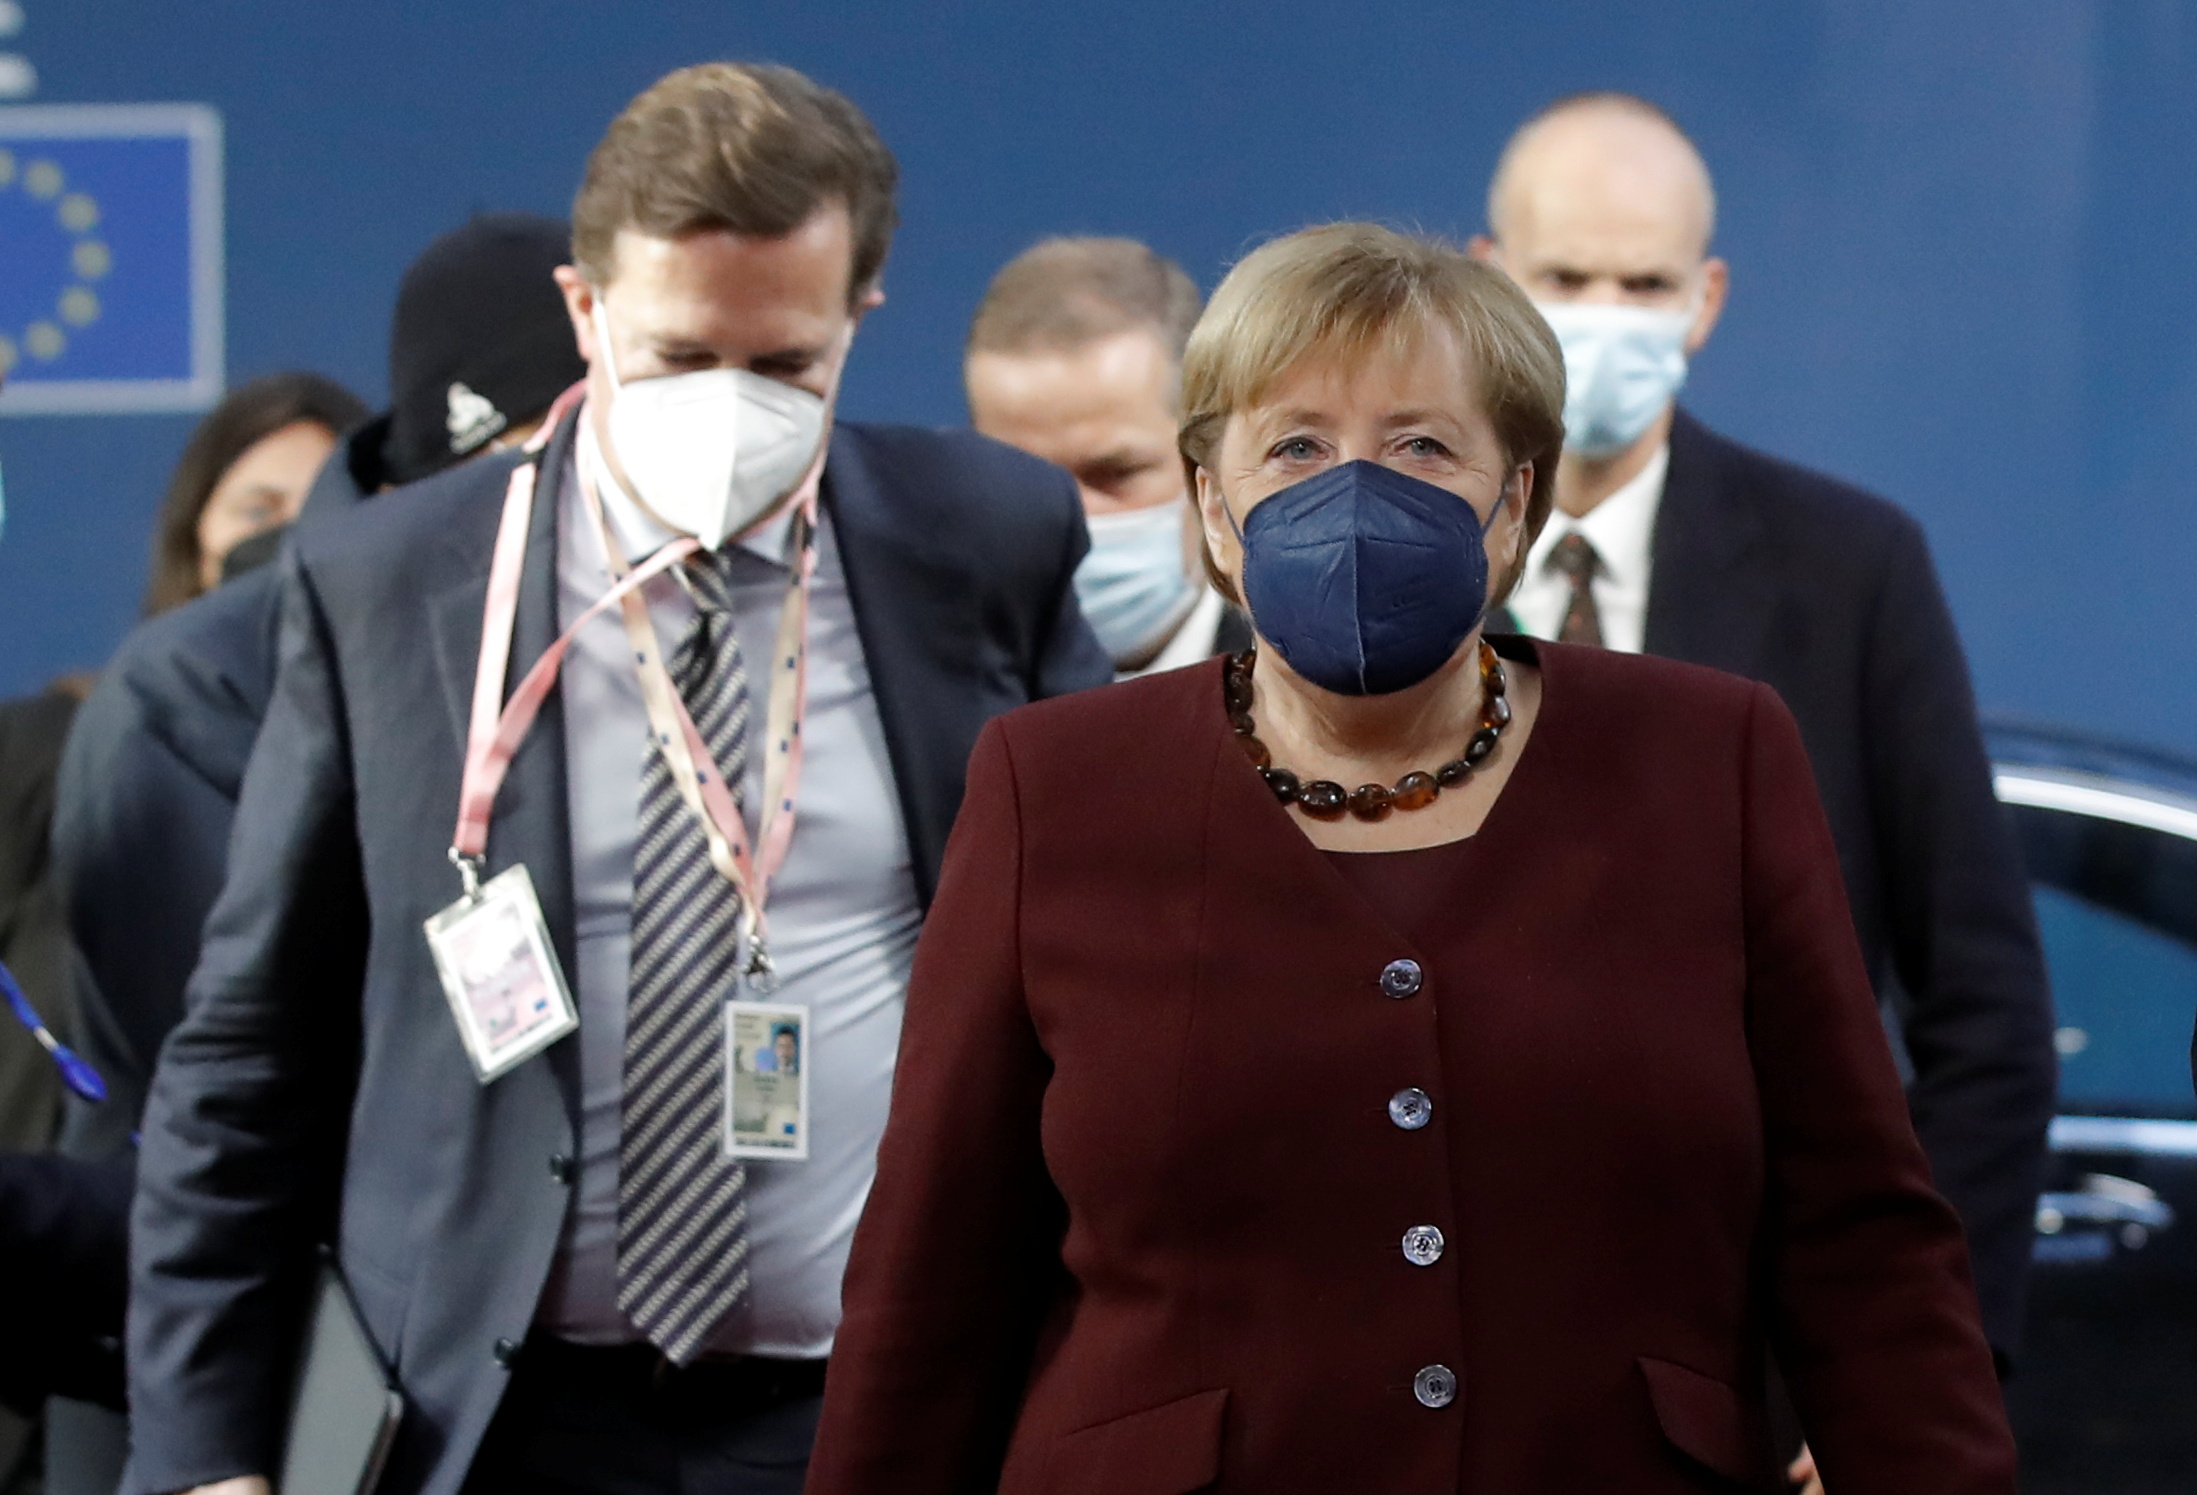 Germany's Chancellor Angela Merkel arrives for the second day of the EU leaders summit, in Brussels, Belgium, October 22, 2021. Olivier Hoslet/Pool/via REUTERS